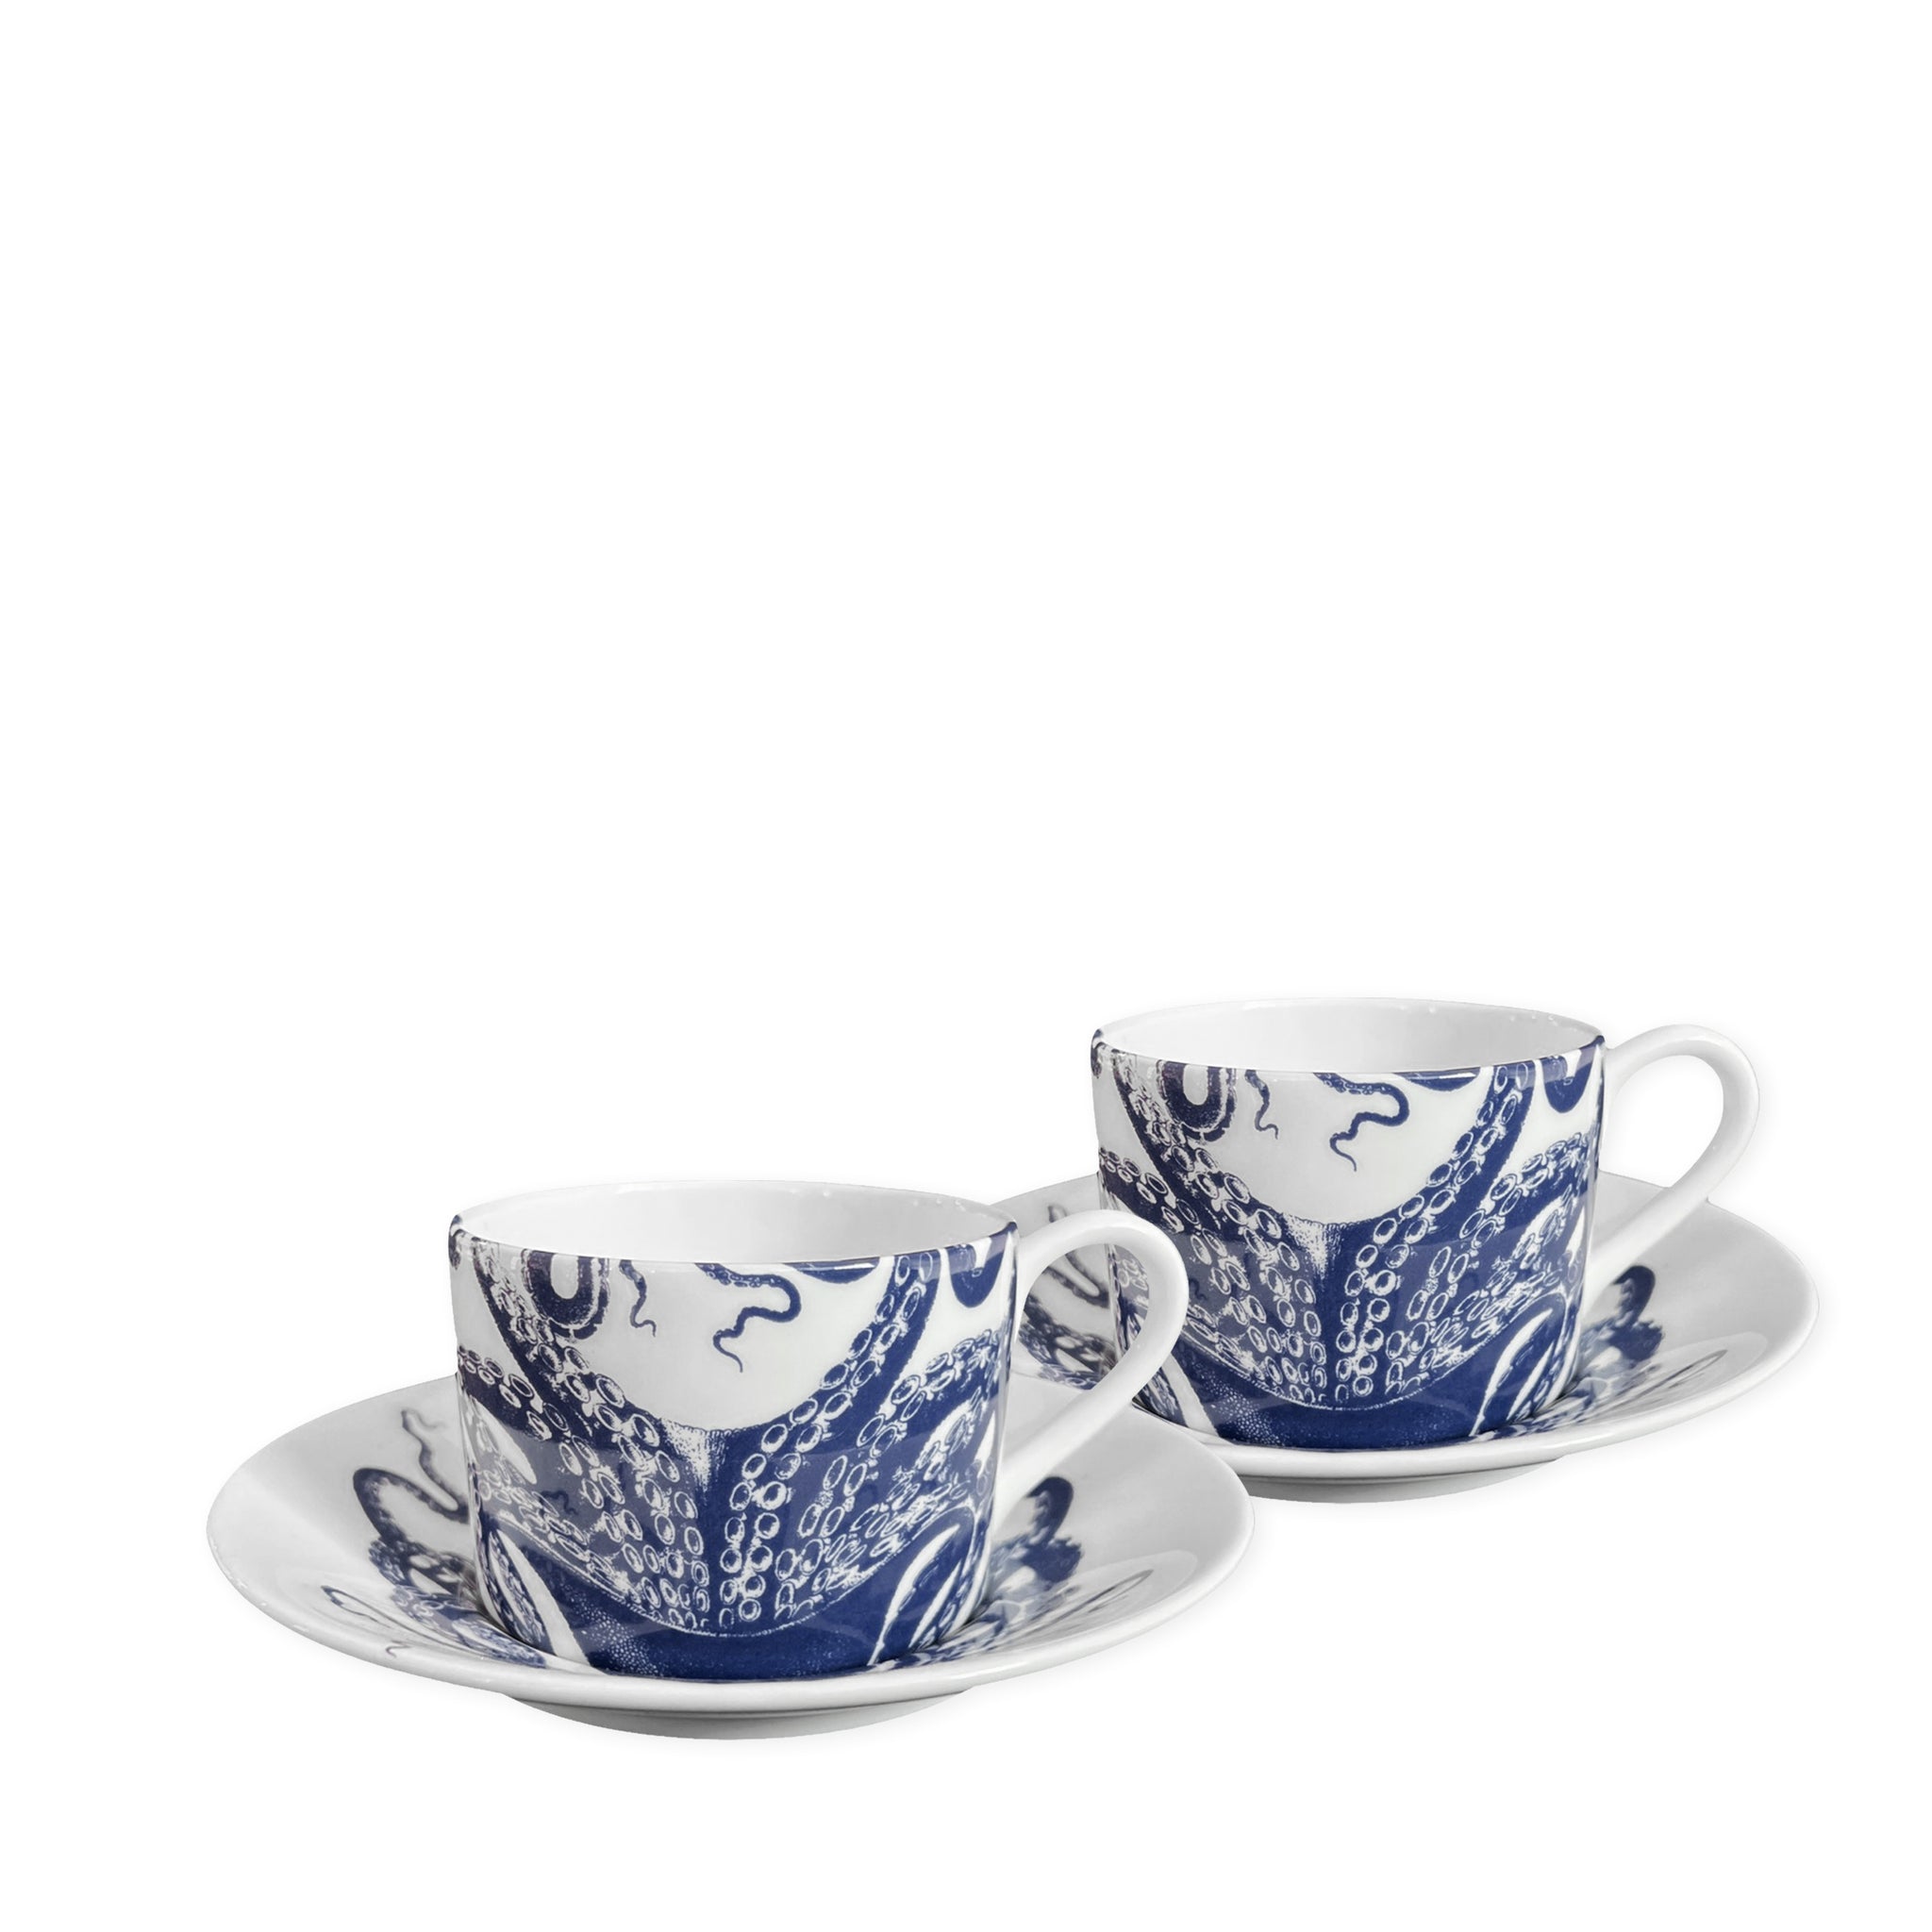 Lucy Cup & Saucer - Set/2